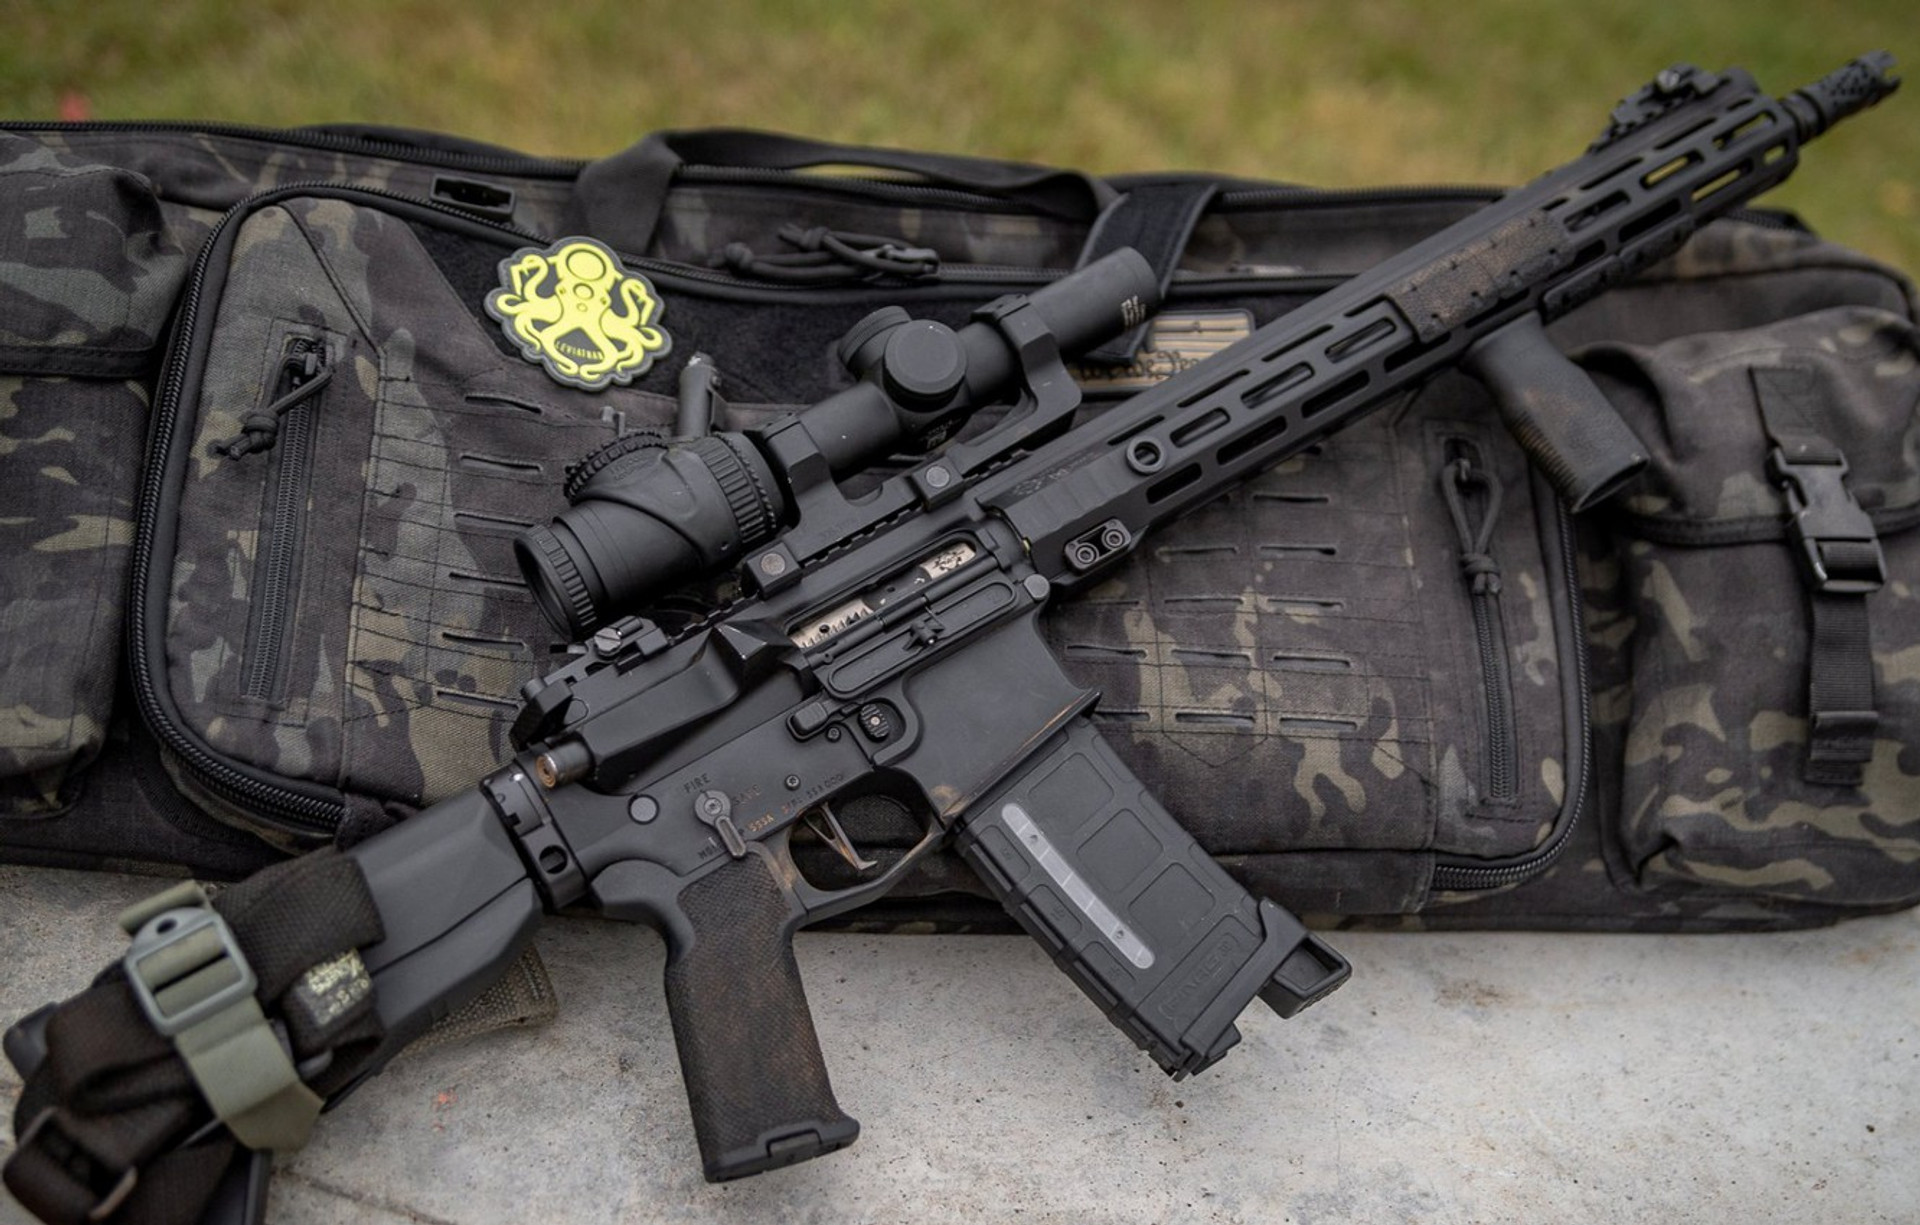 Customized Ar 15 How To Build The Perfect Rifle For Your Needs News